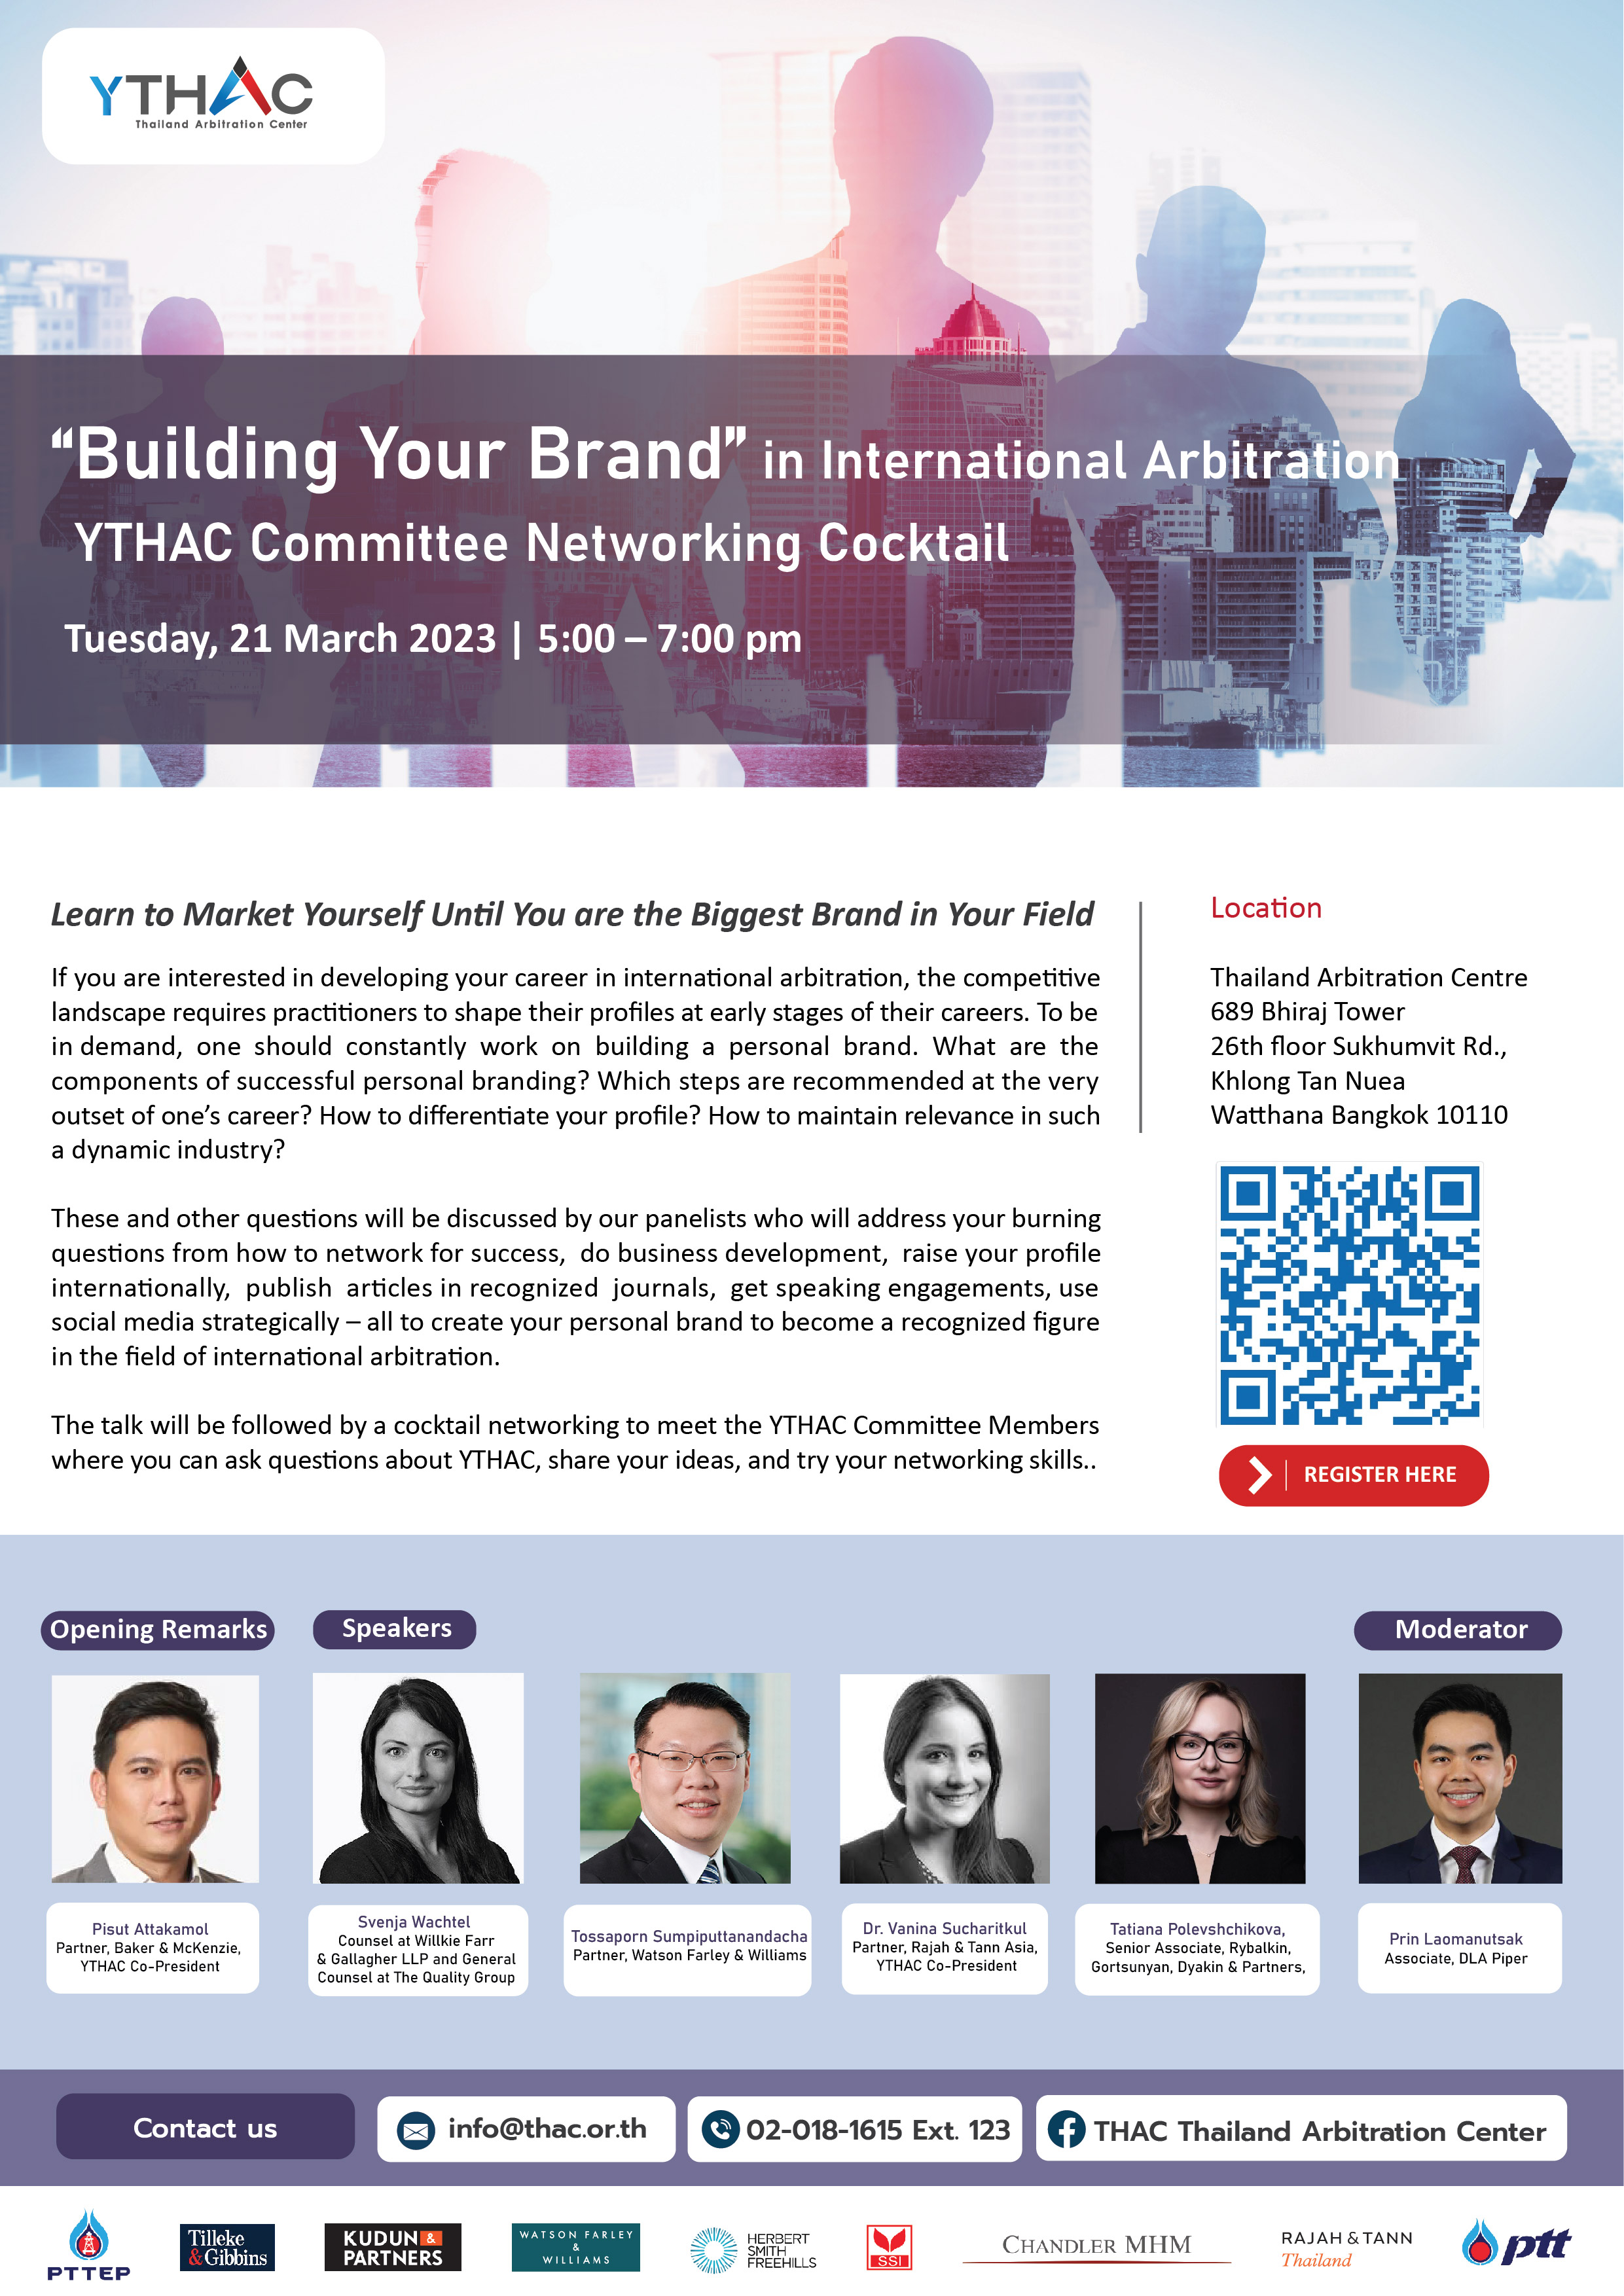 “Building Your Brand” in International Arbitration with YTHAC Committee Networking